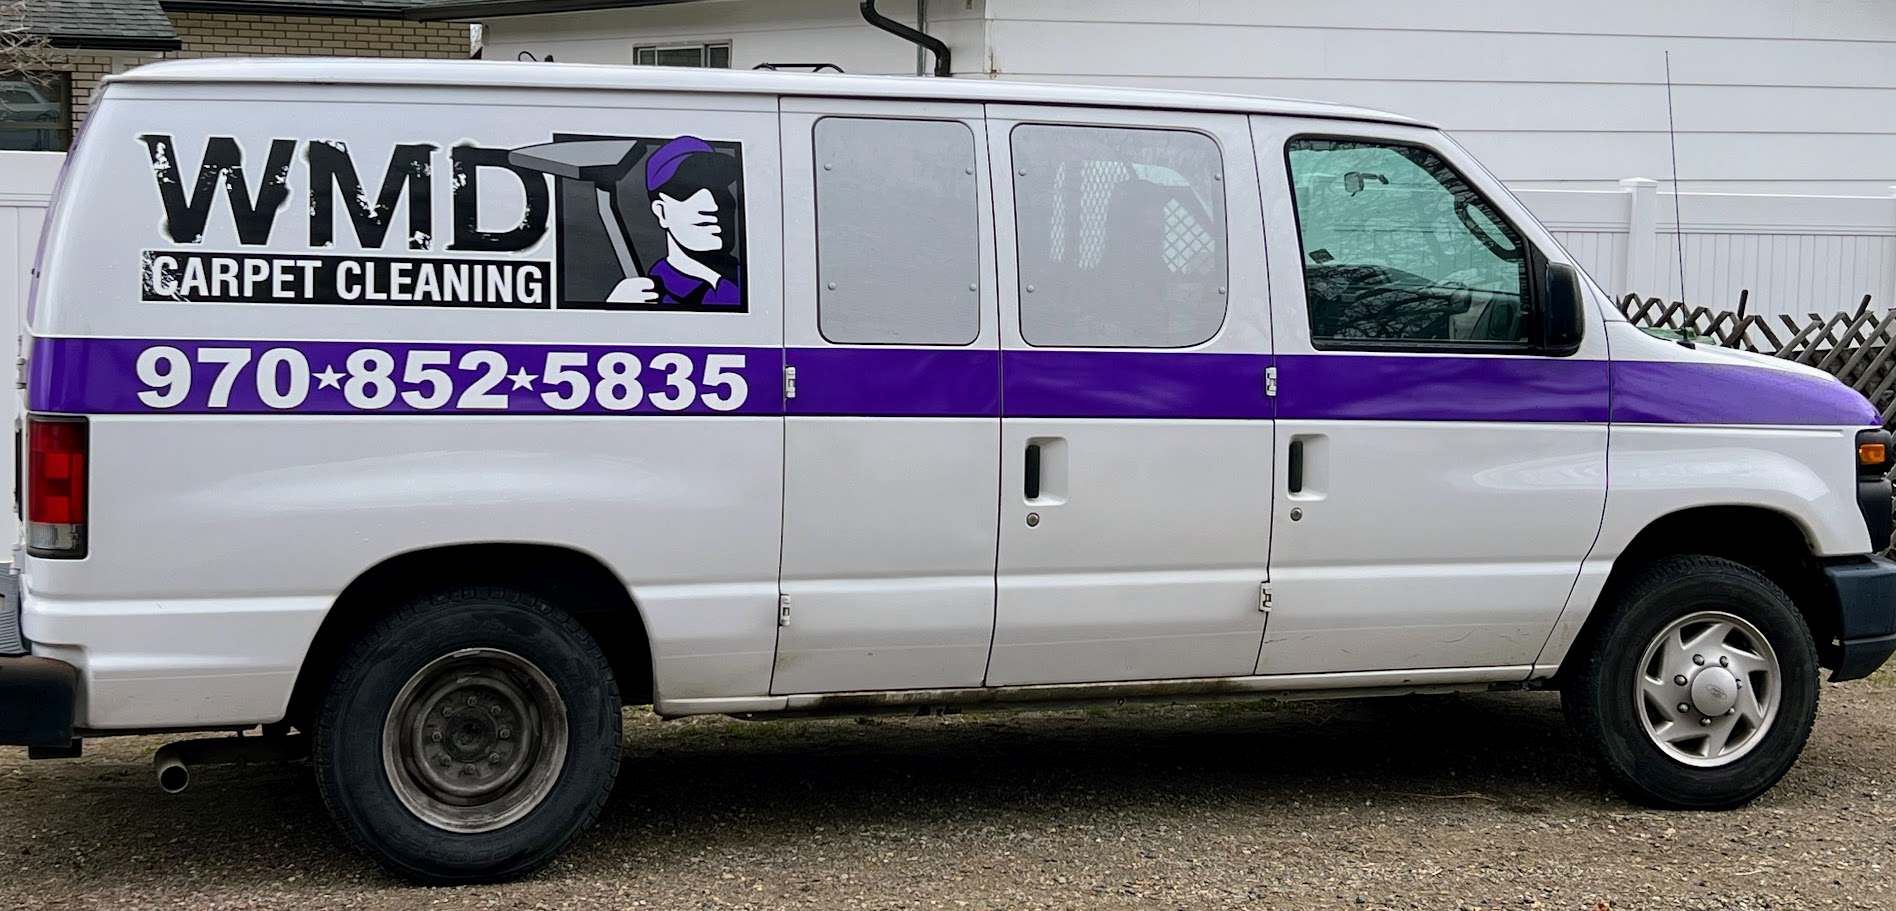 WMD Carpet Cleaning & Professional Services Van